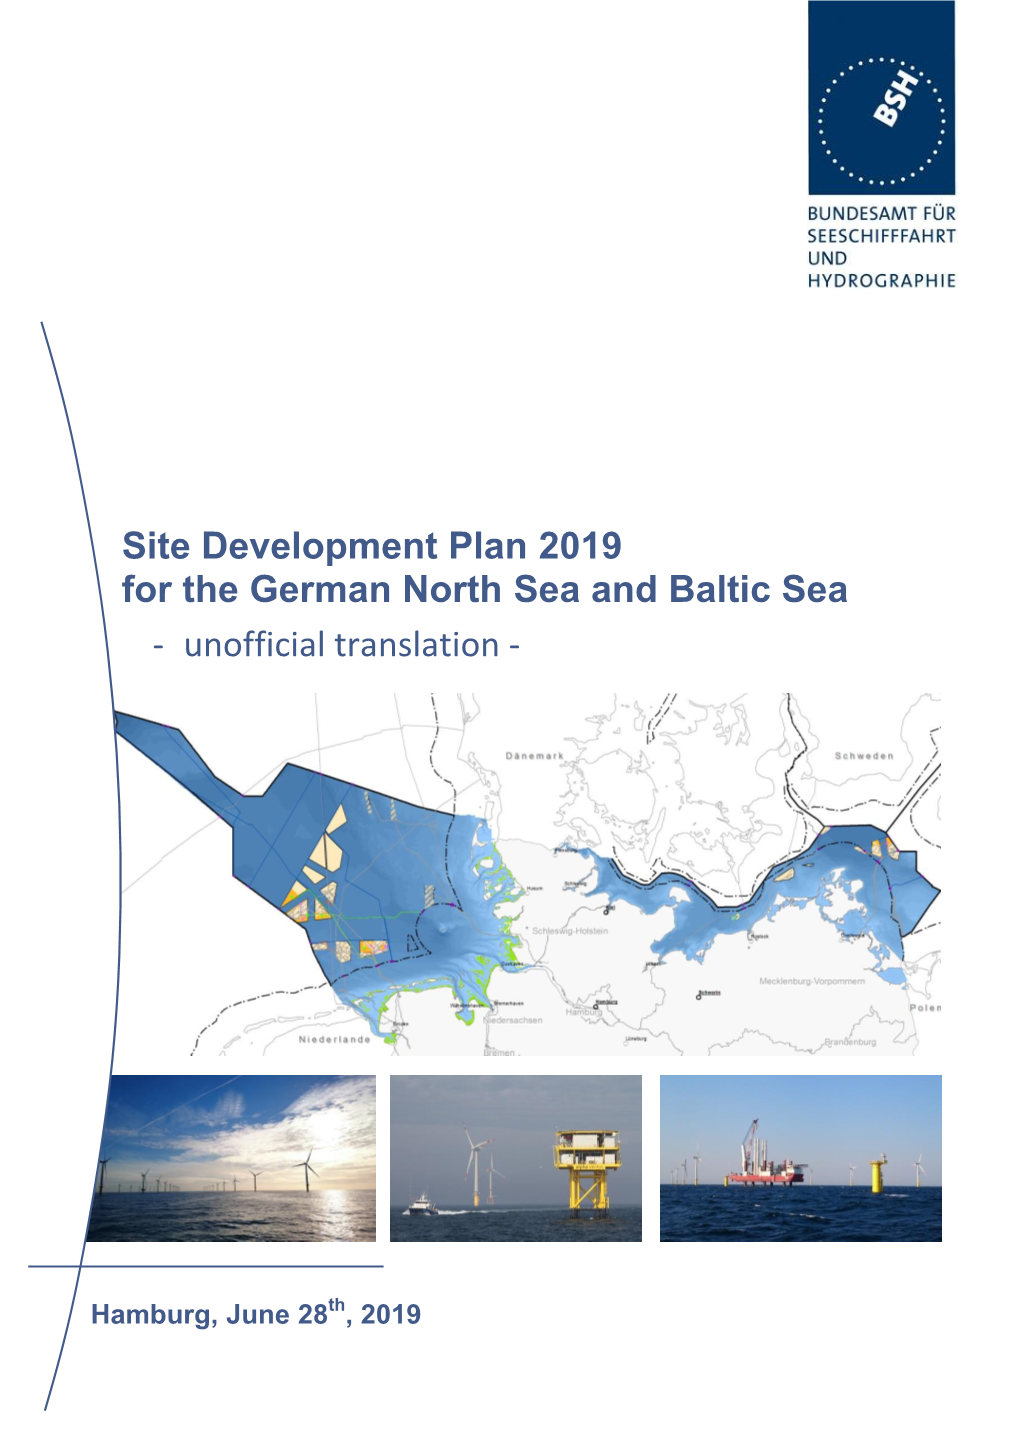 Site Development Plan 2019 for the German North Sea and Baltic Sea